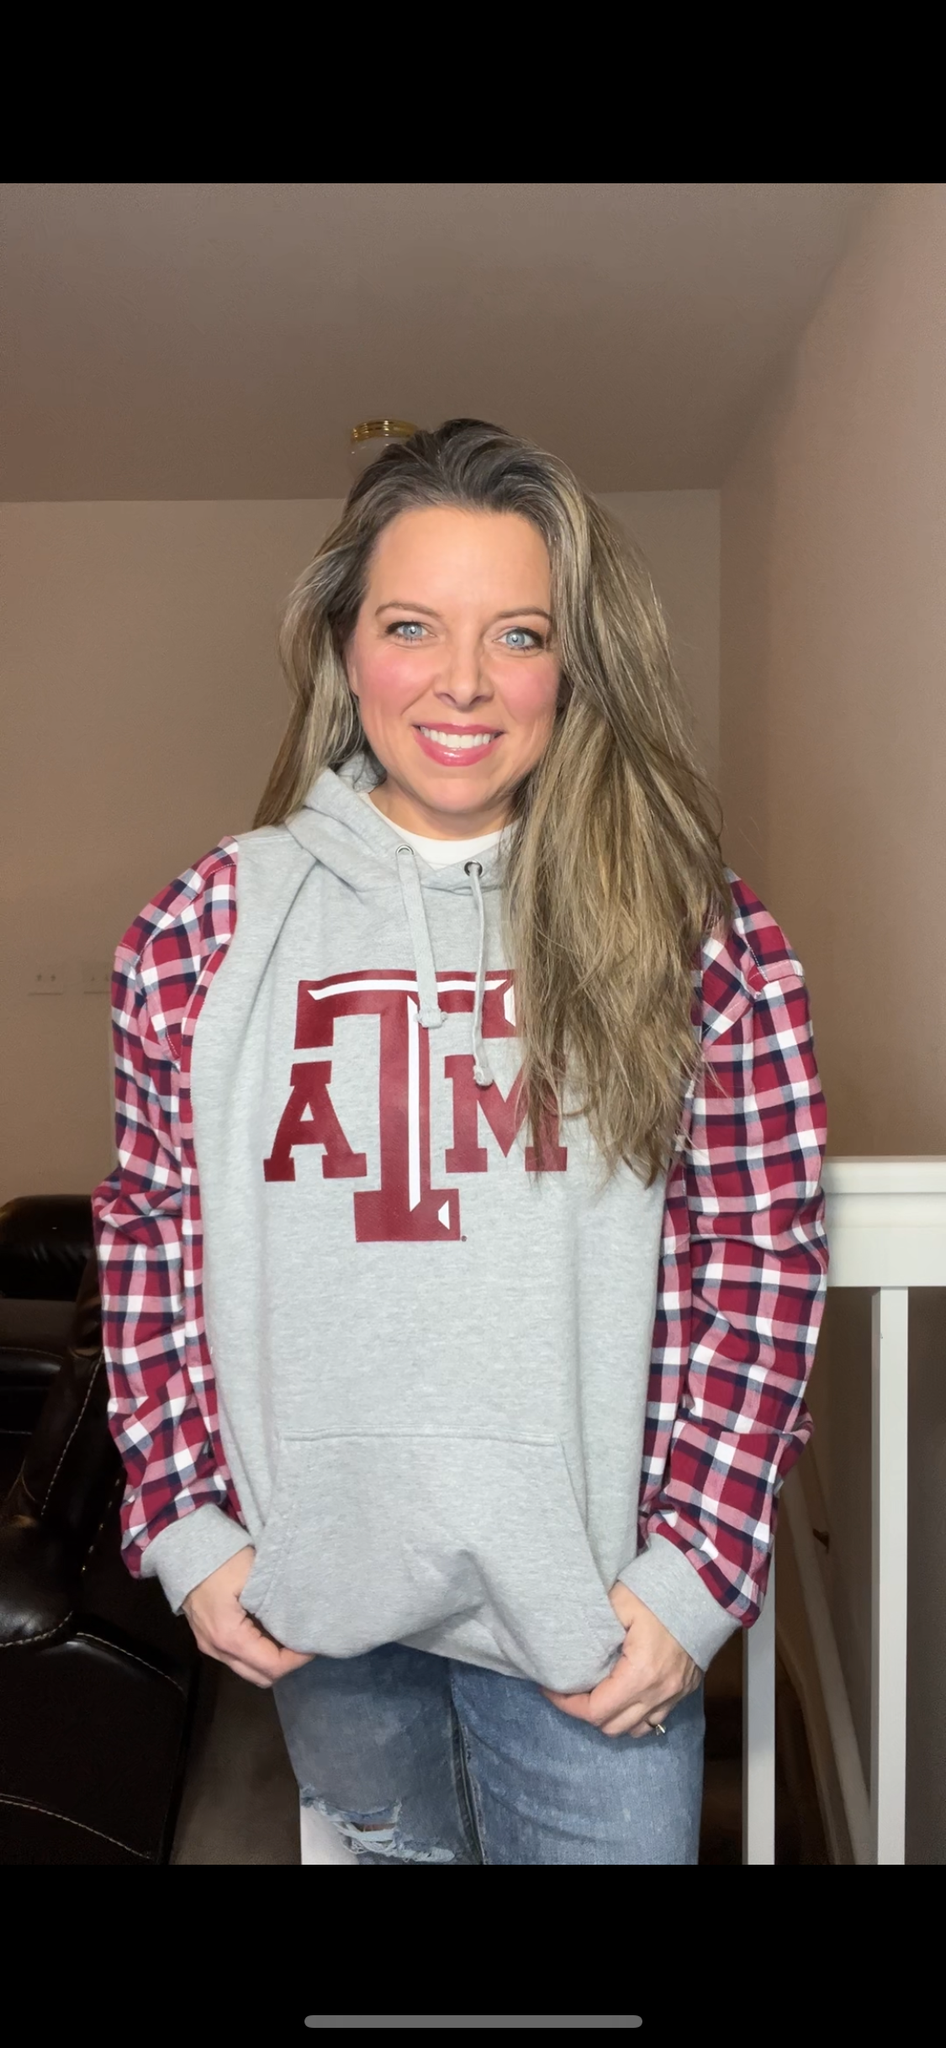 Texas A&M - woman’s L/XL – thick sweatshirt with cotton sleeves ￼￼